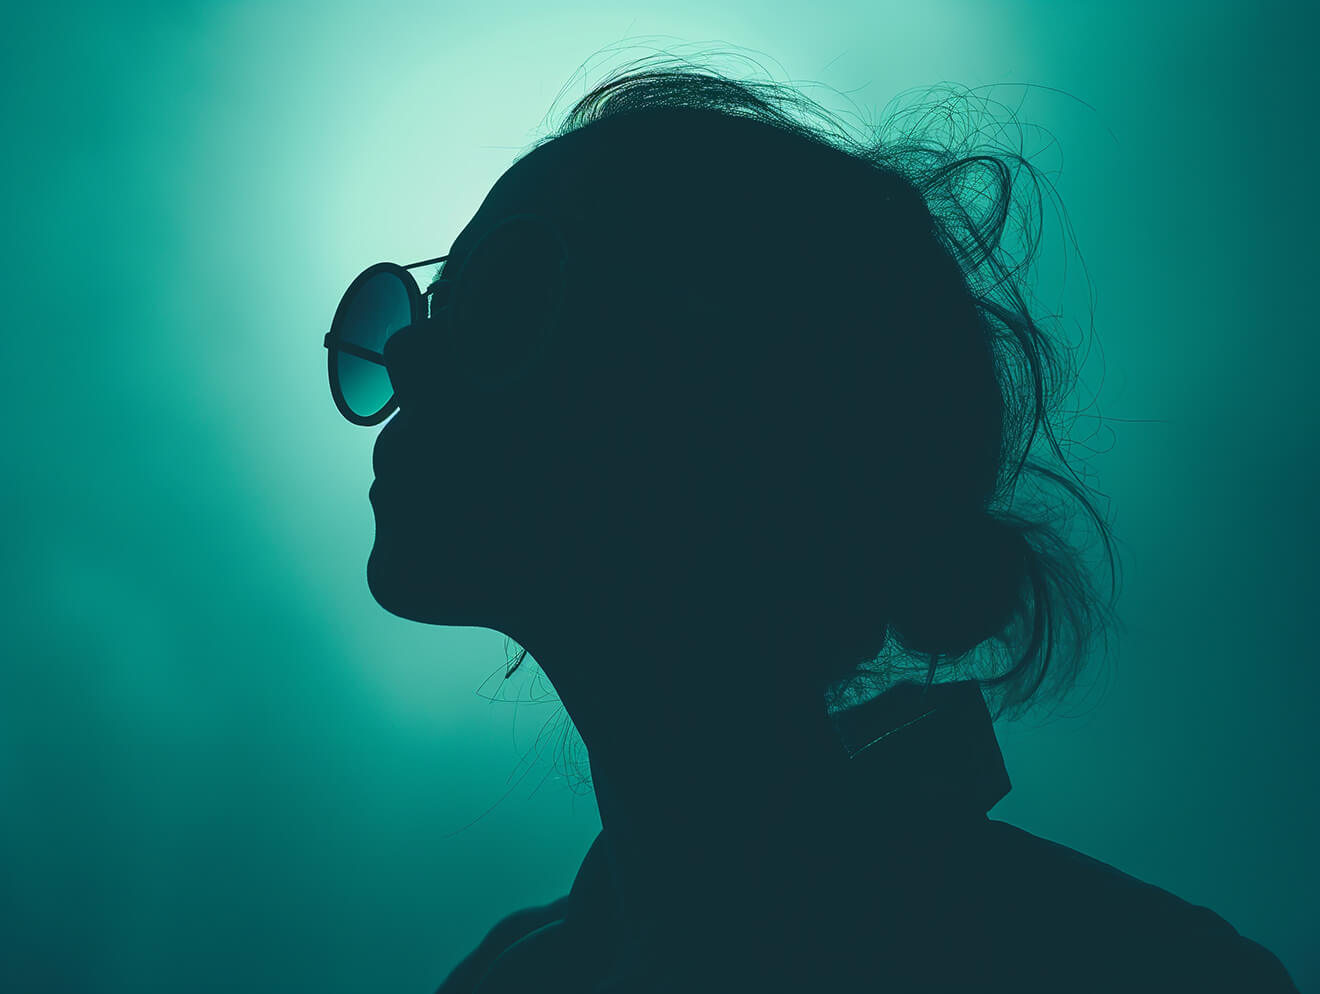 Contemplative-Silhouette-in-Teal